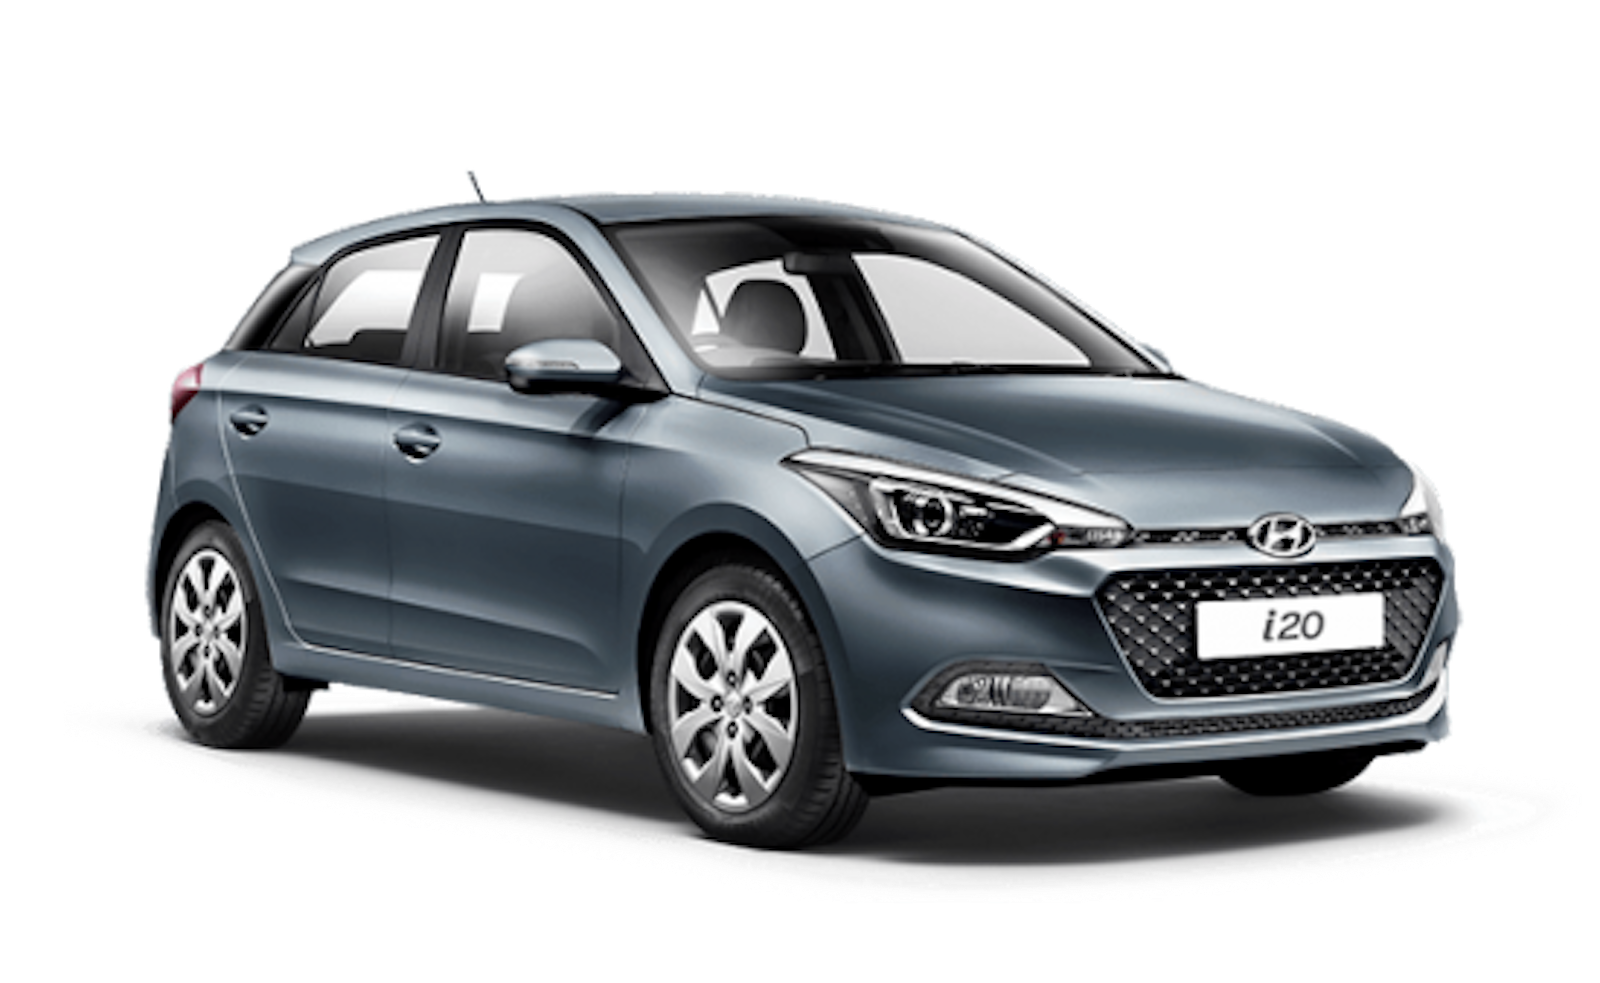 Hyundai i20 colours guide with prices | carwow